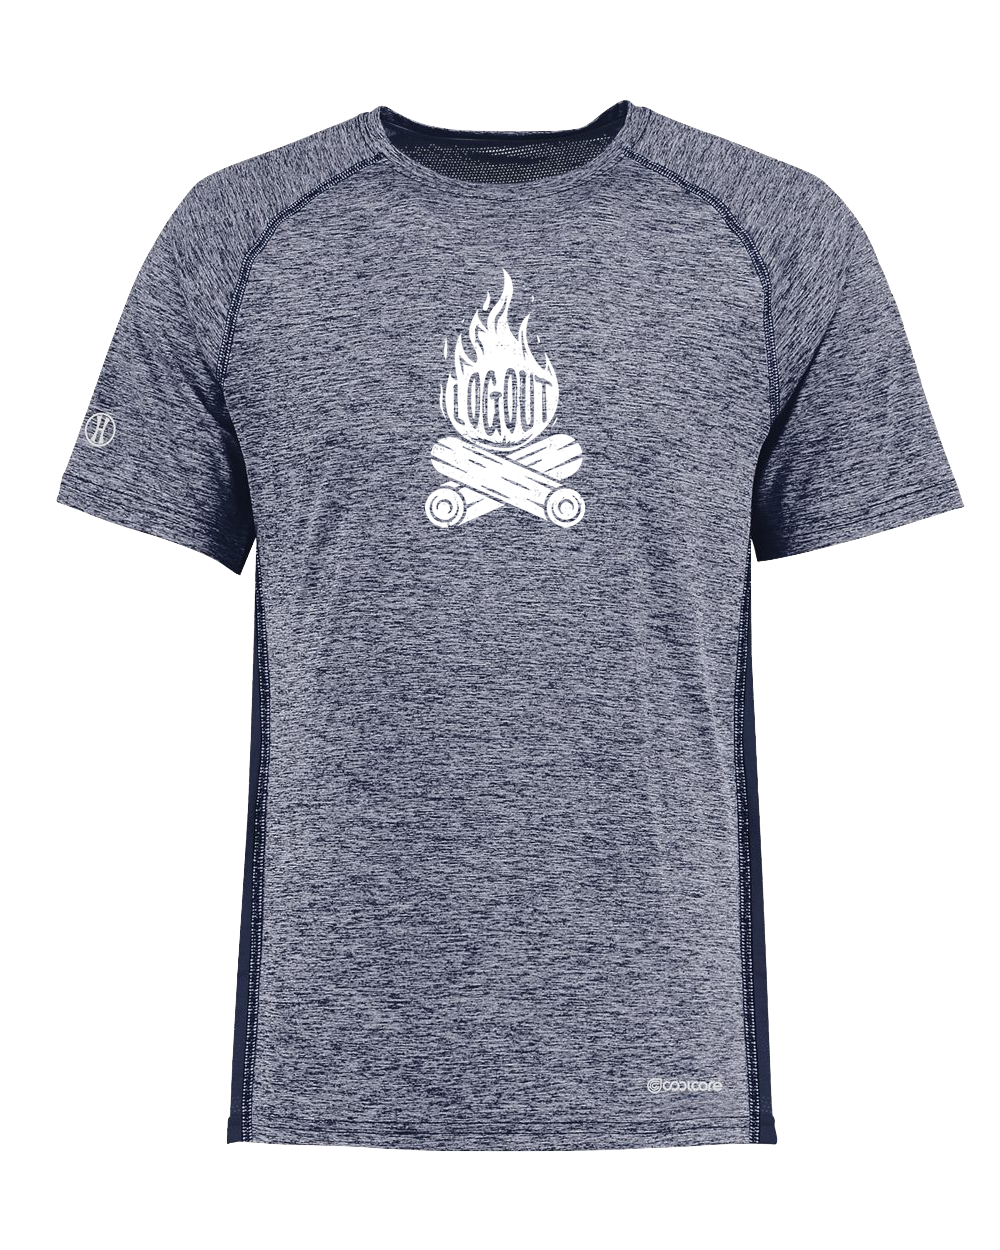 LOG OUT CAMPFIRE Poly/Elastane High Performance T-Shirt with UPF 50+